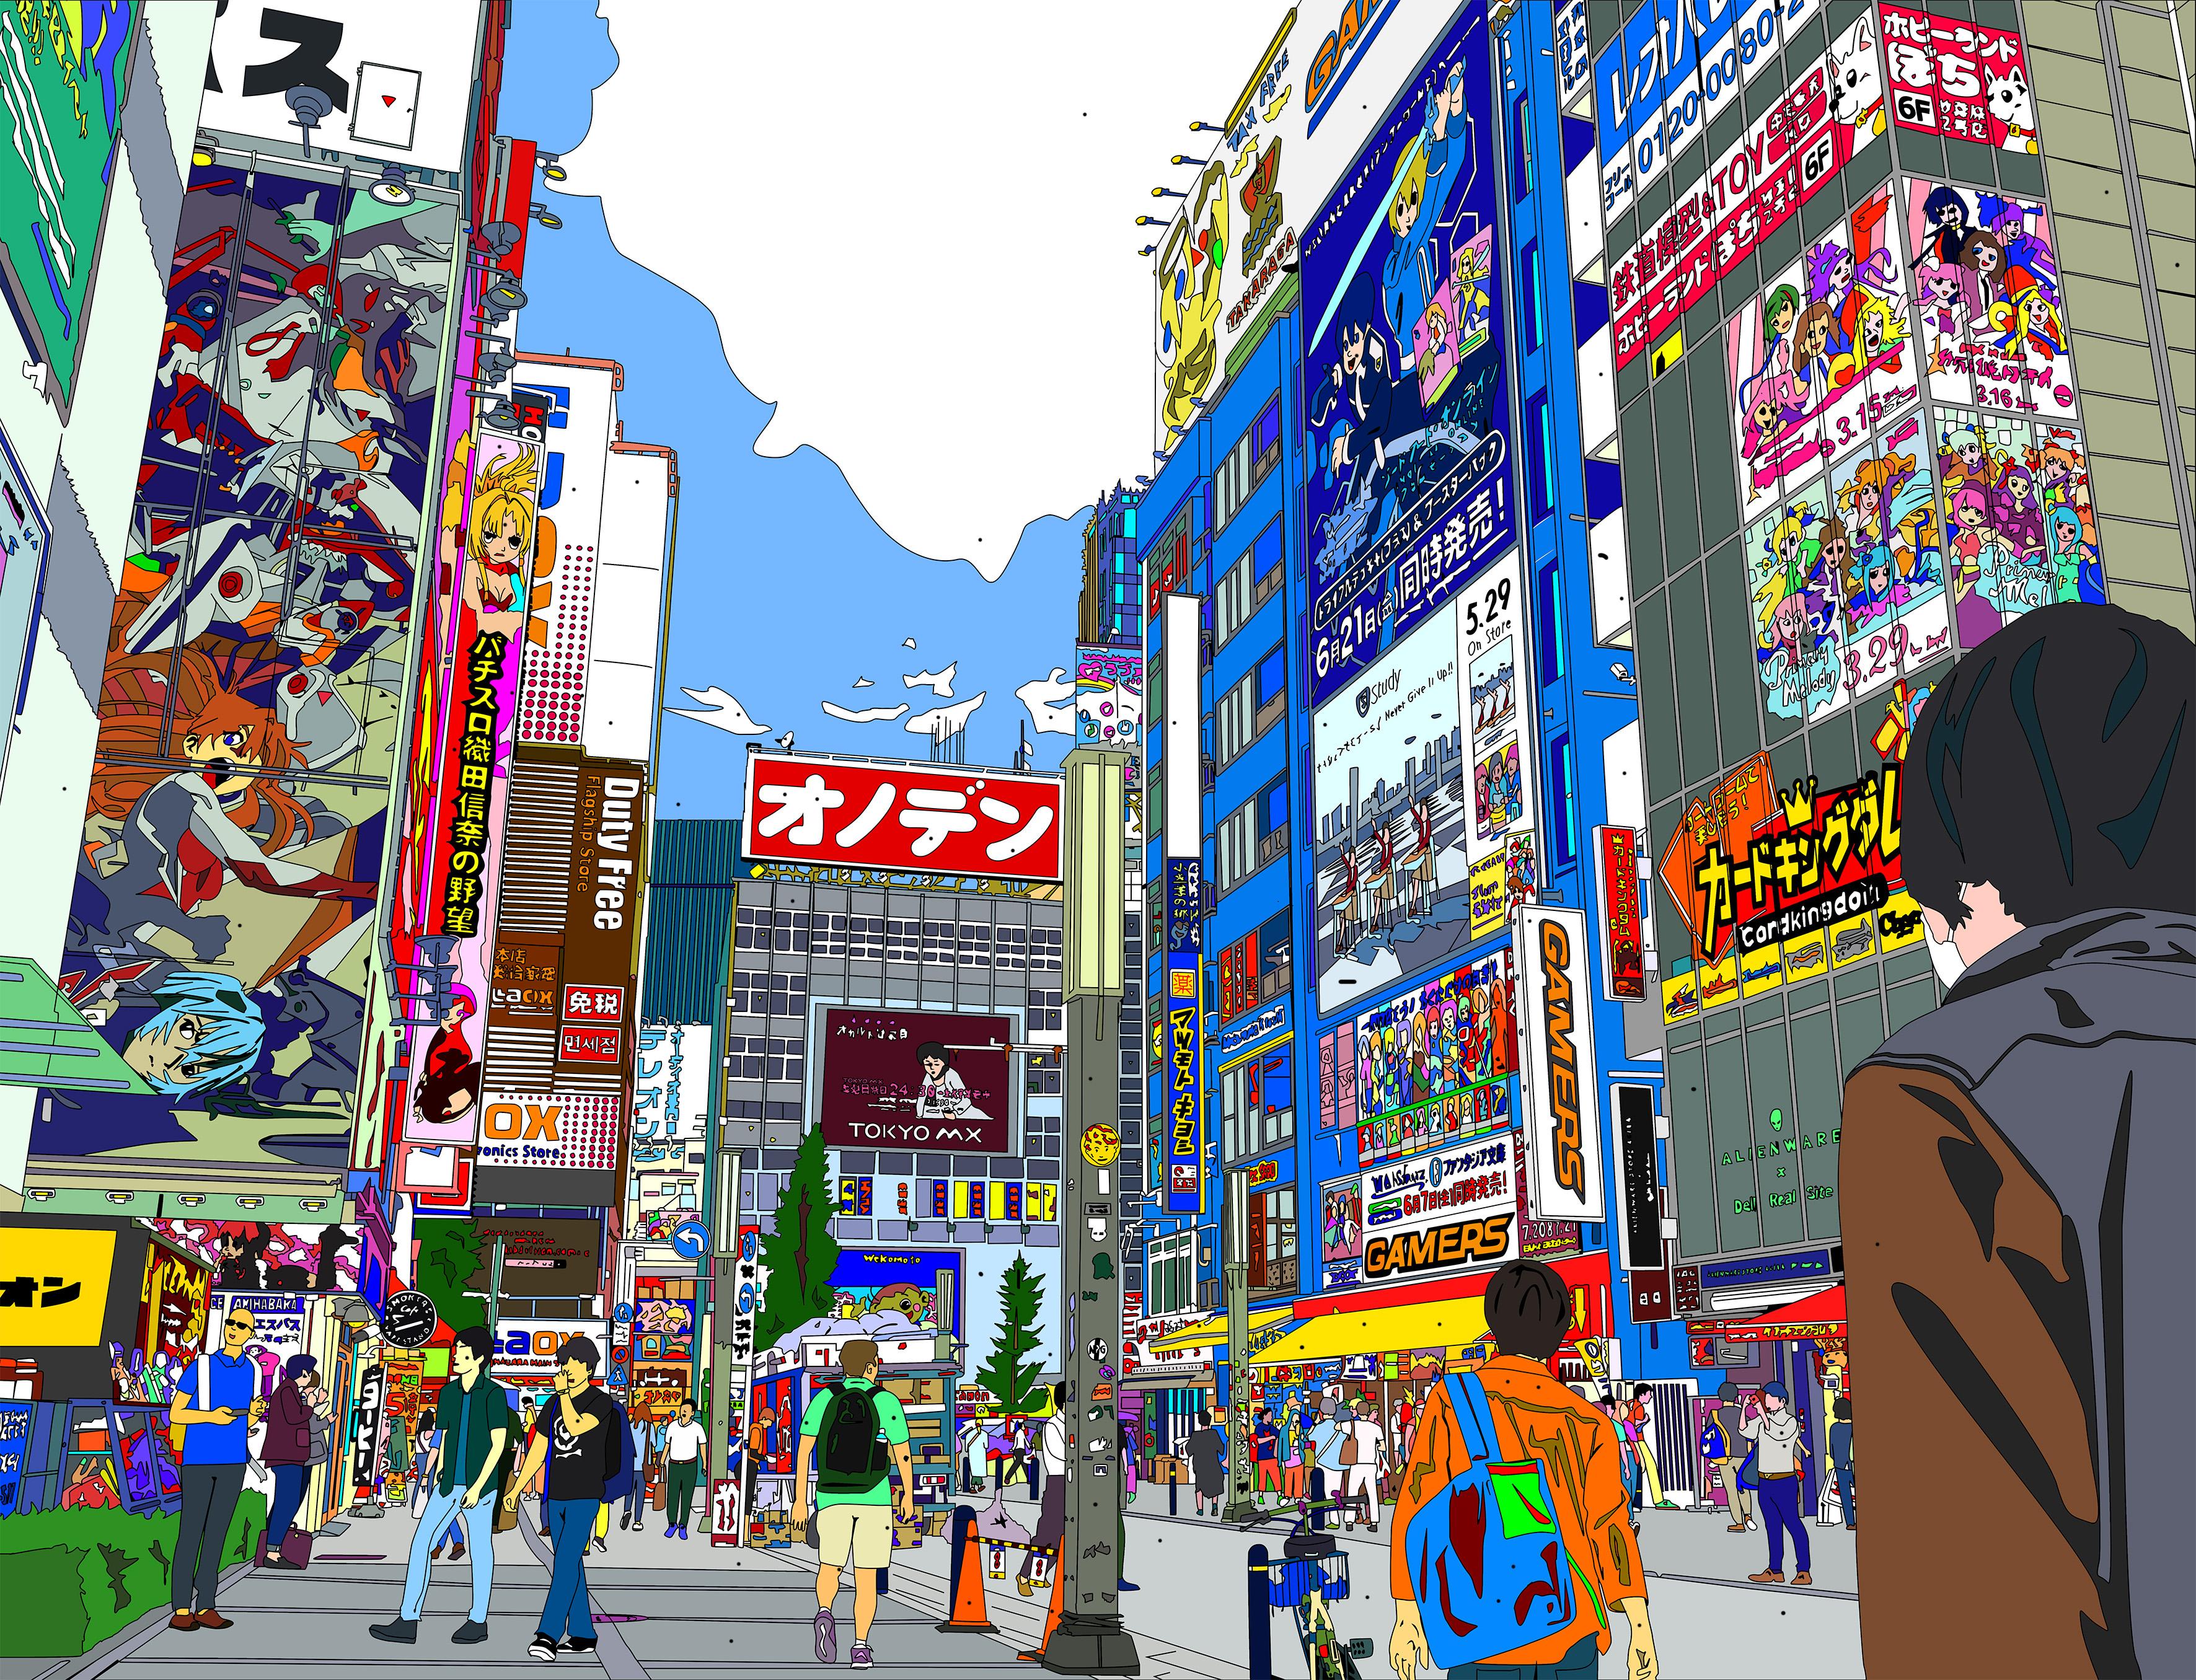 Digital art printed on canvas, original edition 1/1

''Akihabara is one of those area in which you will go back several times, I almost pass by there once a day when I am in town. Those boards, those colours and those vibes can really excite your